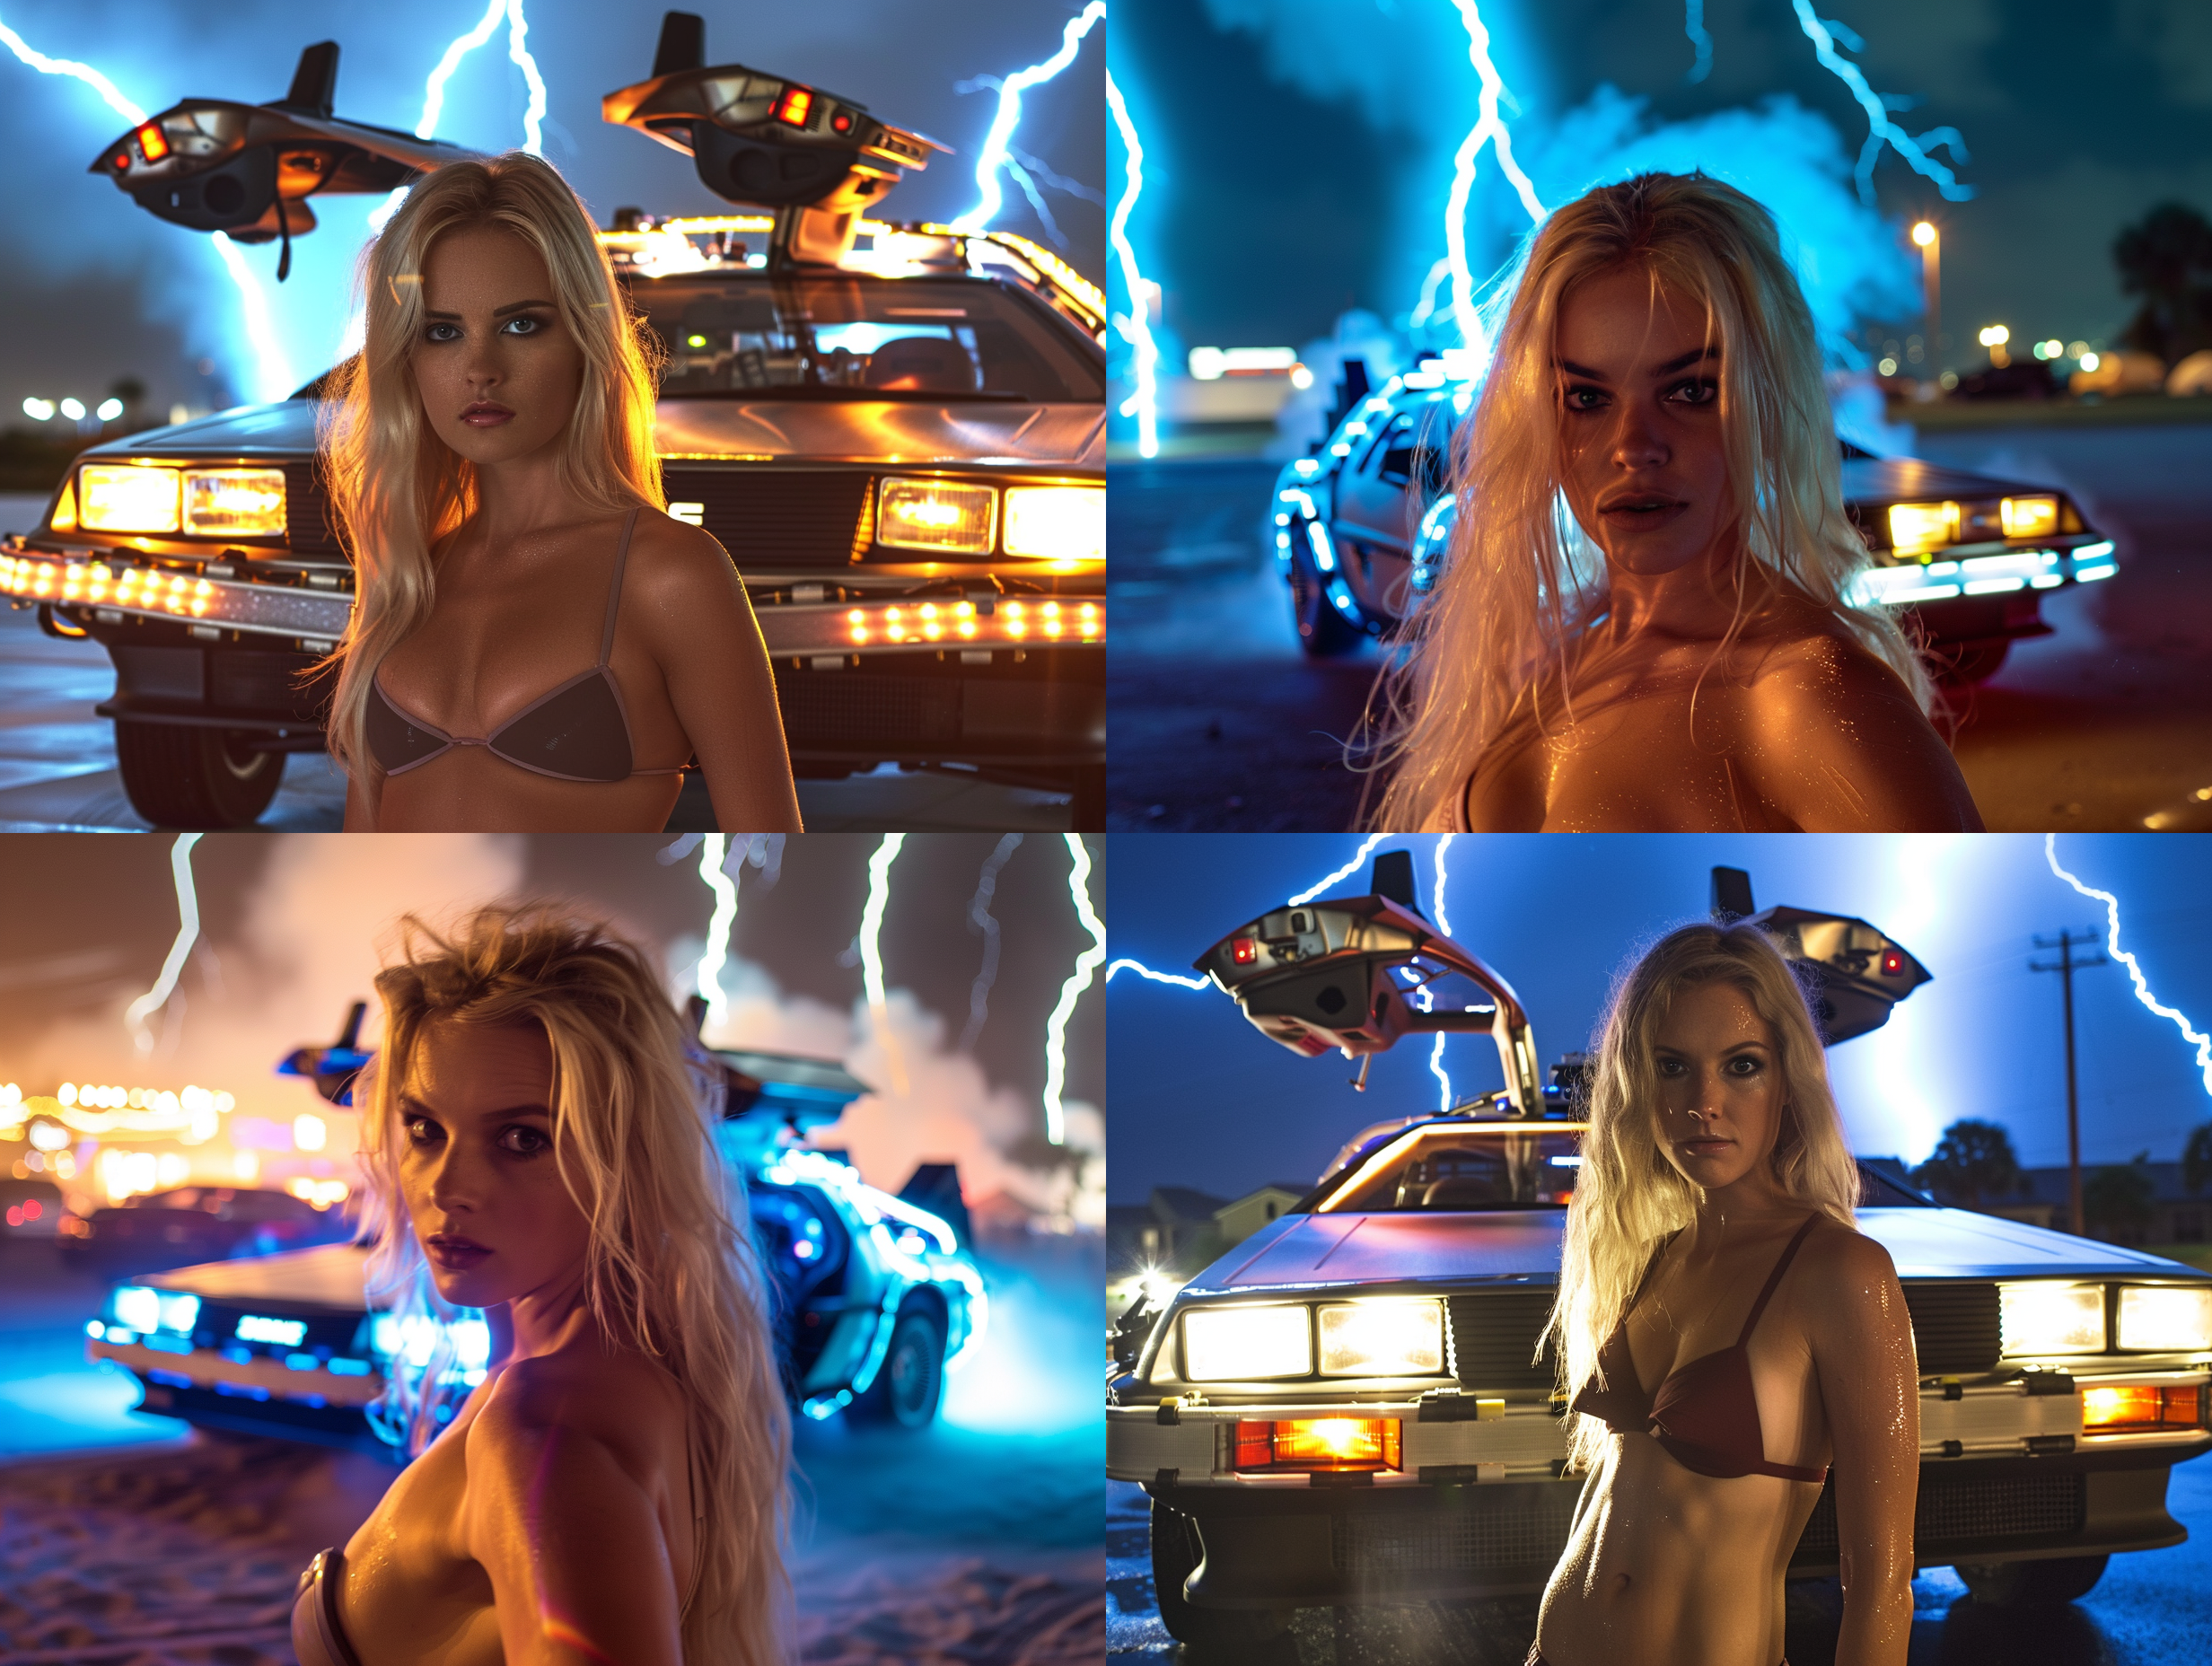 Blonde in bikini in foreground close to camera with Back to the future delorean in background. Lit up, scifi, vivid blue lightning in sky, smoky, fire trails, artistic, bright